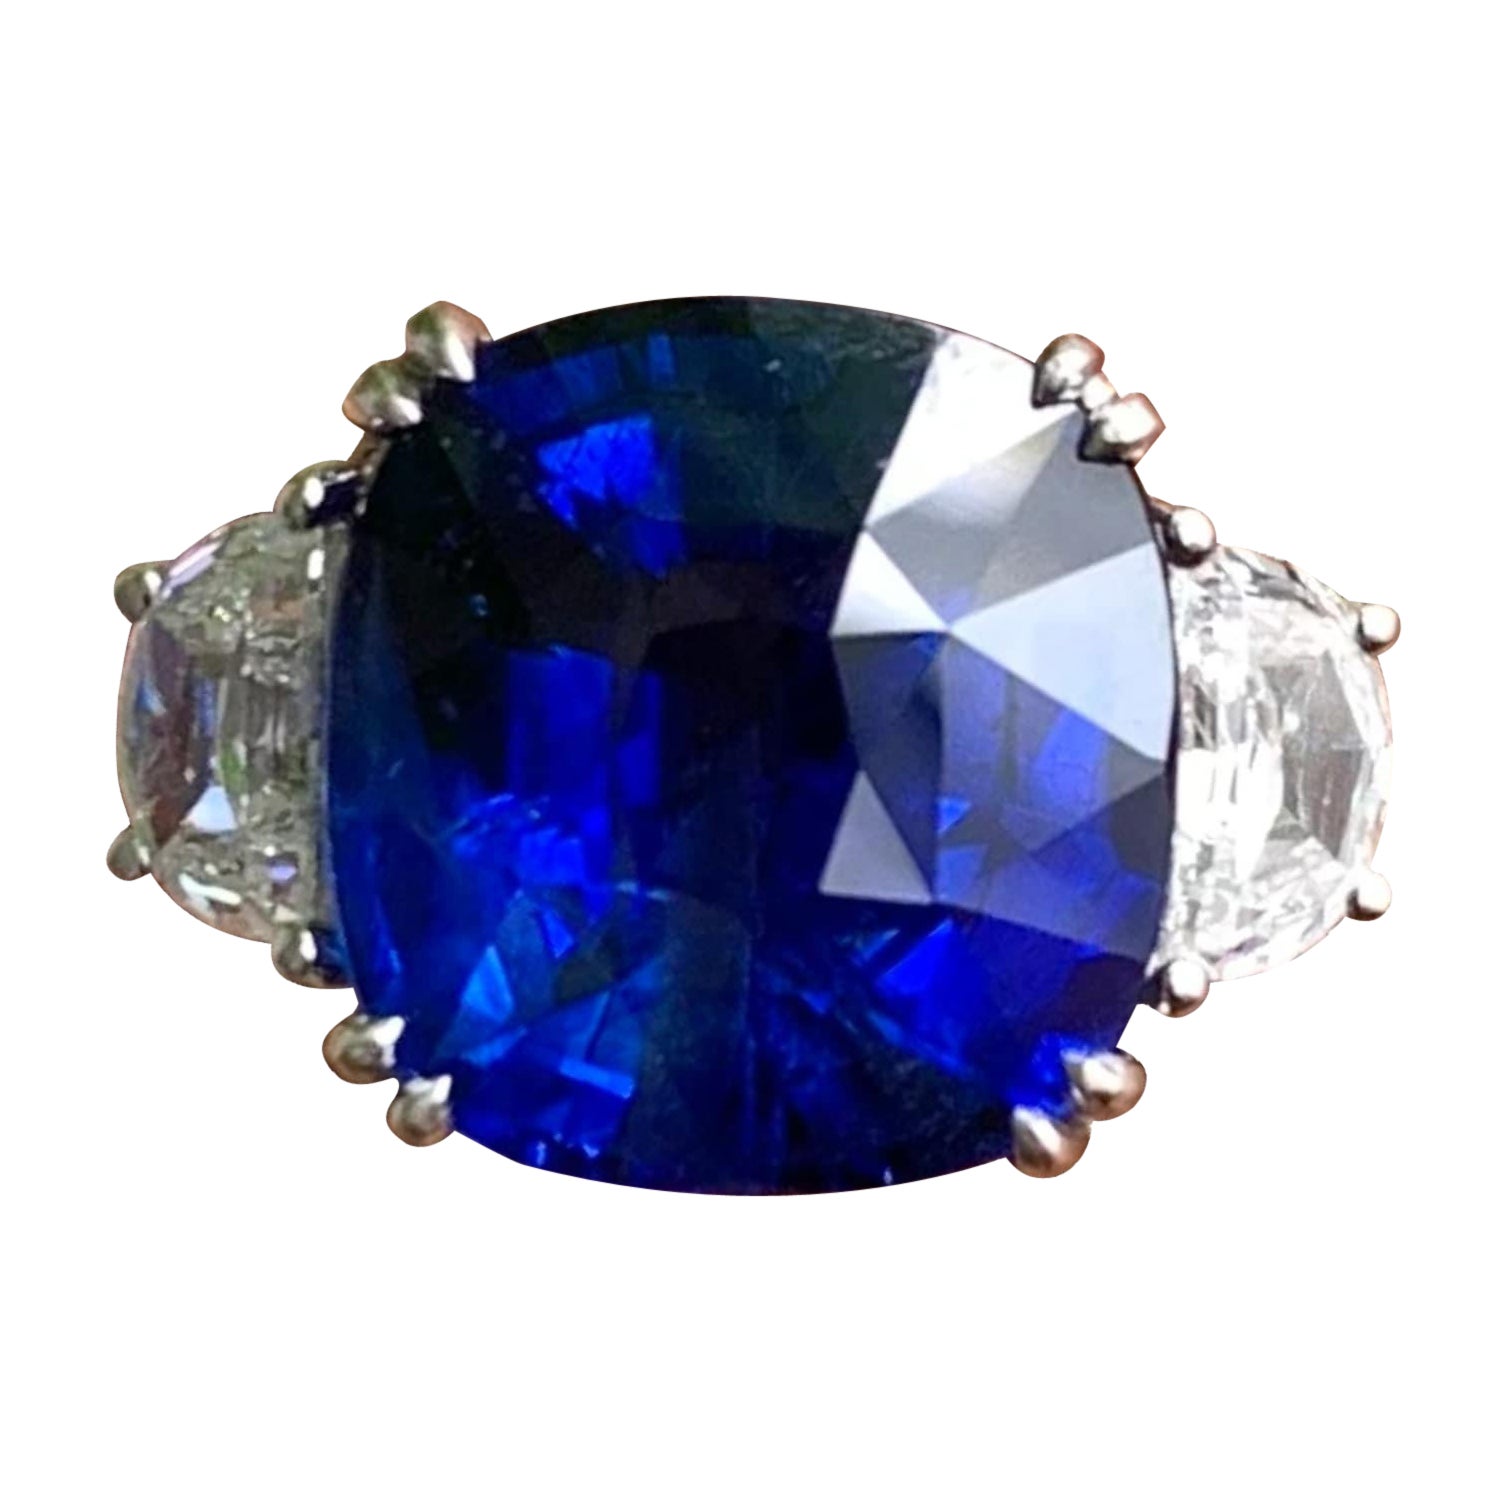 Magnificent 13.48 Carat Blue Sapphire Three Stone Ring in 18K White Gold For Sale